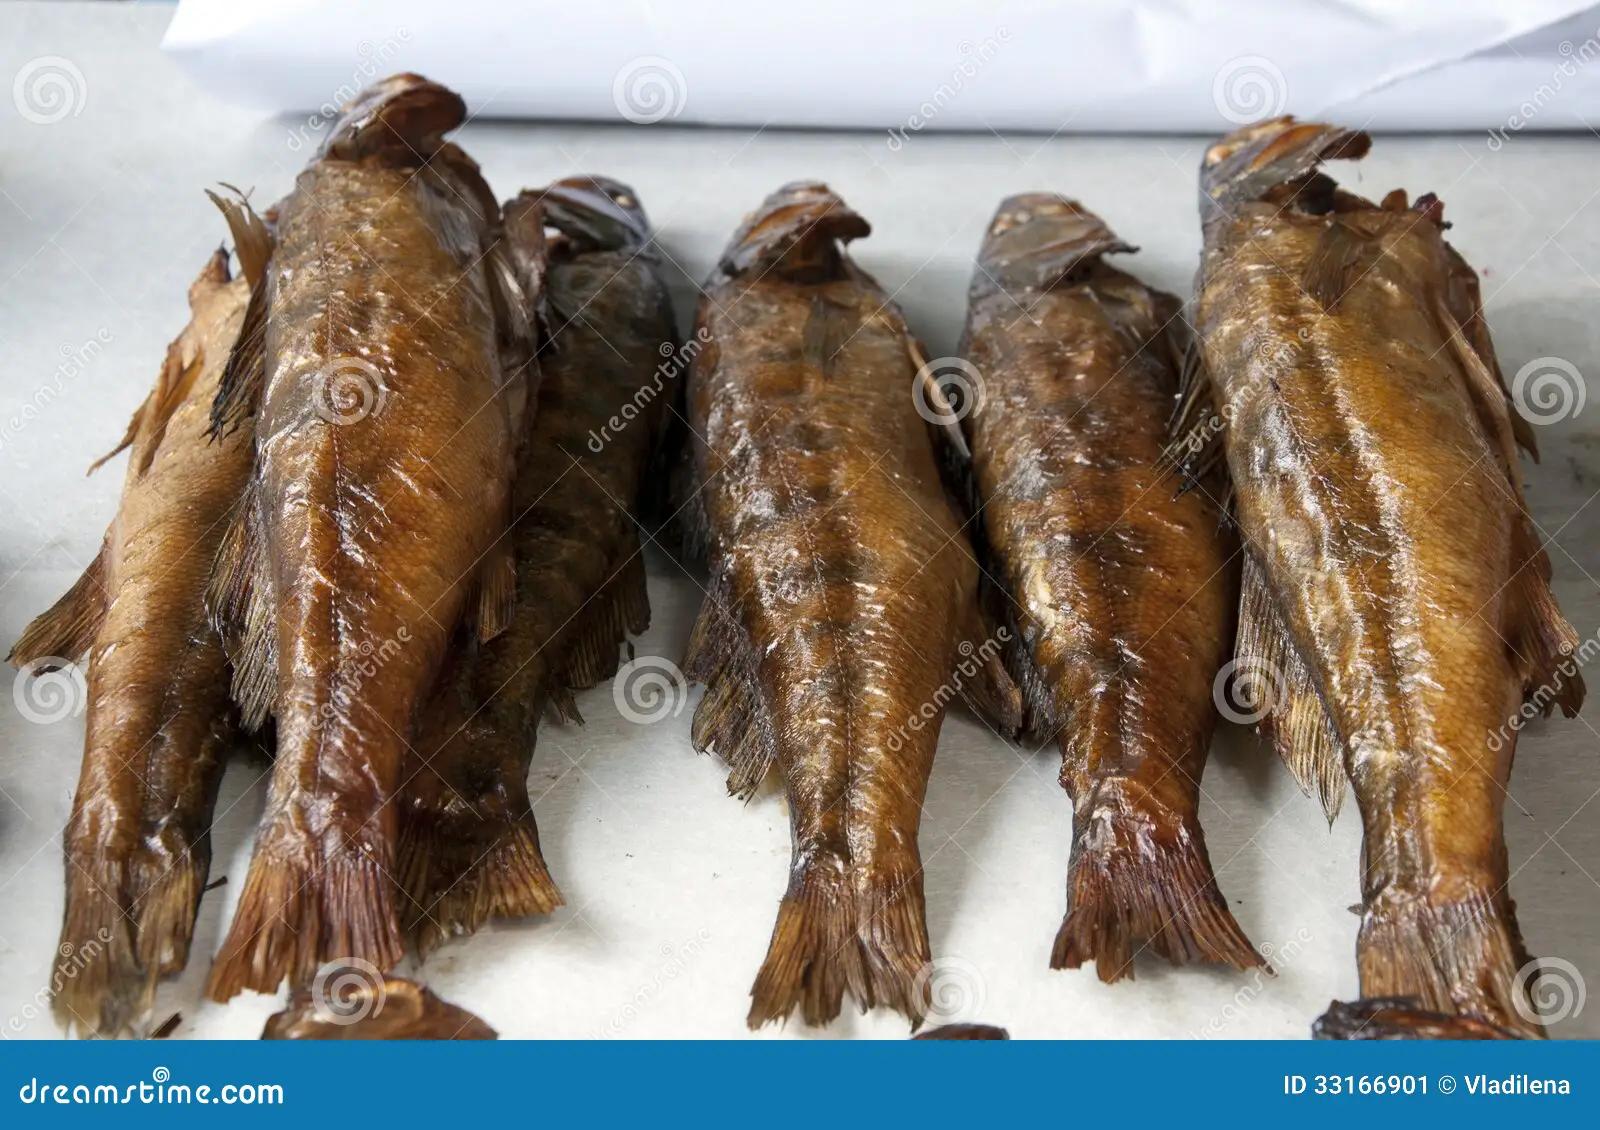 smoked perch - Is perch a tasty fish